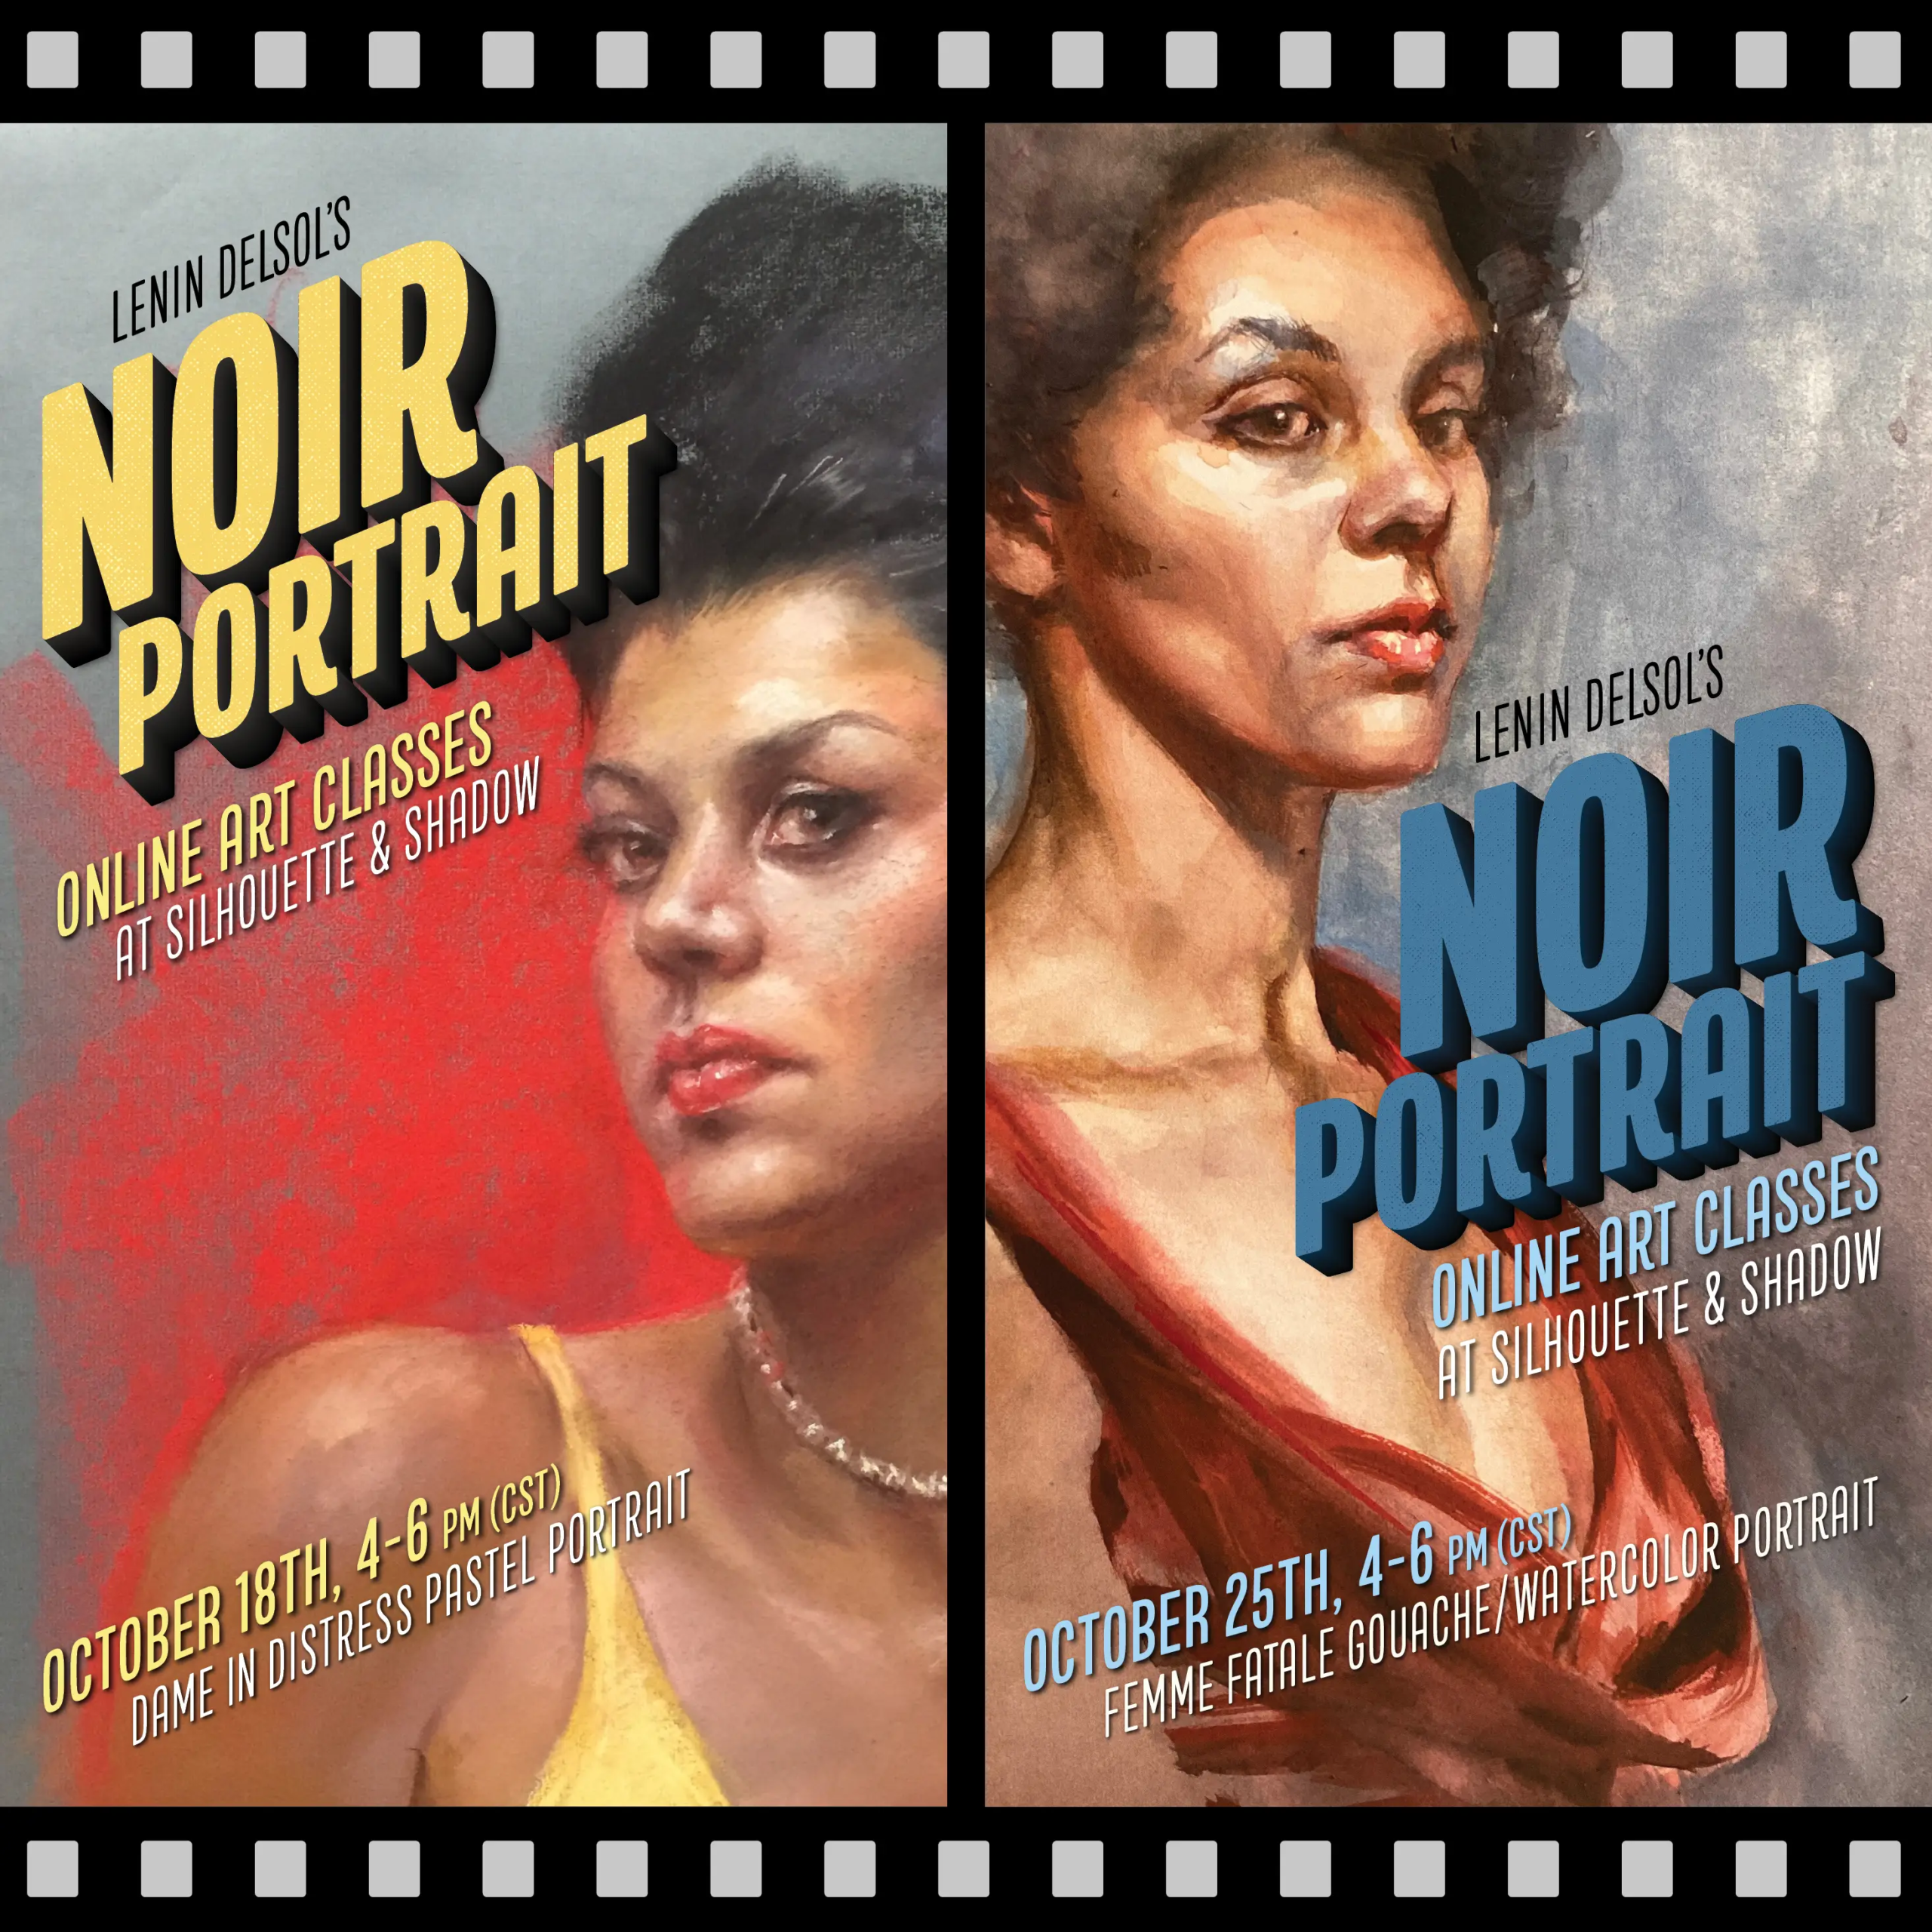 Noir Painting Classes social media post showcasing two femme fatales painted by Lenin Delsol. Layout and text design by Sue Delsol